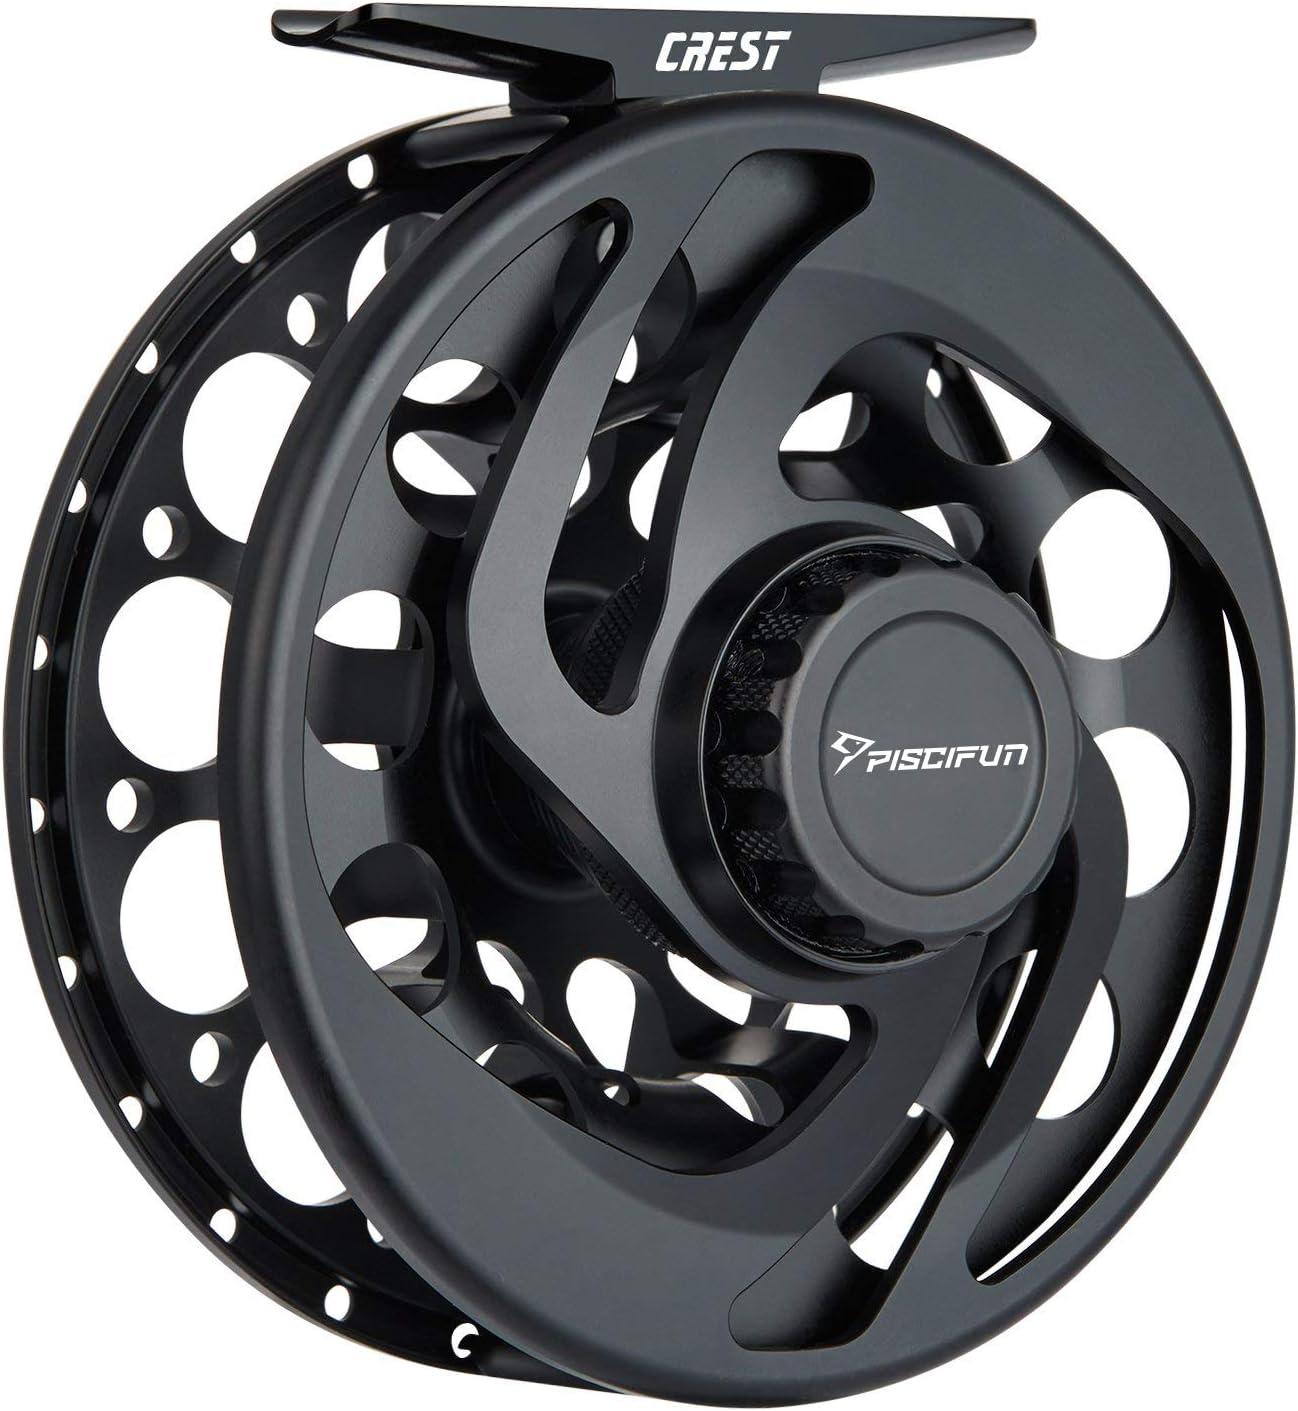 Piscifun® Platte Pro Fly Reel with Full-Sized Drag Knob, Large